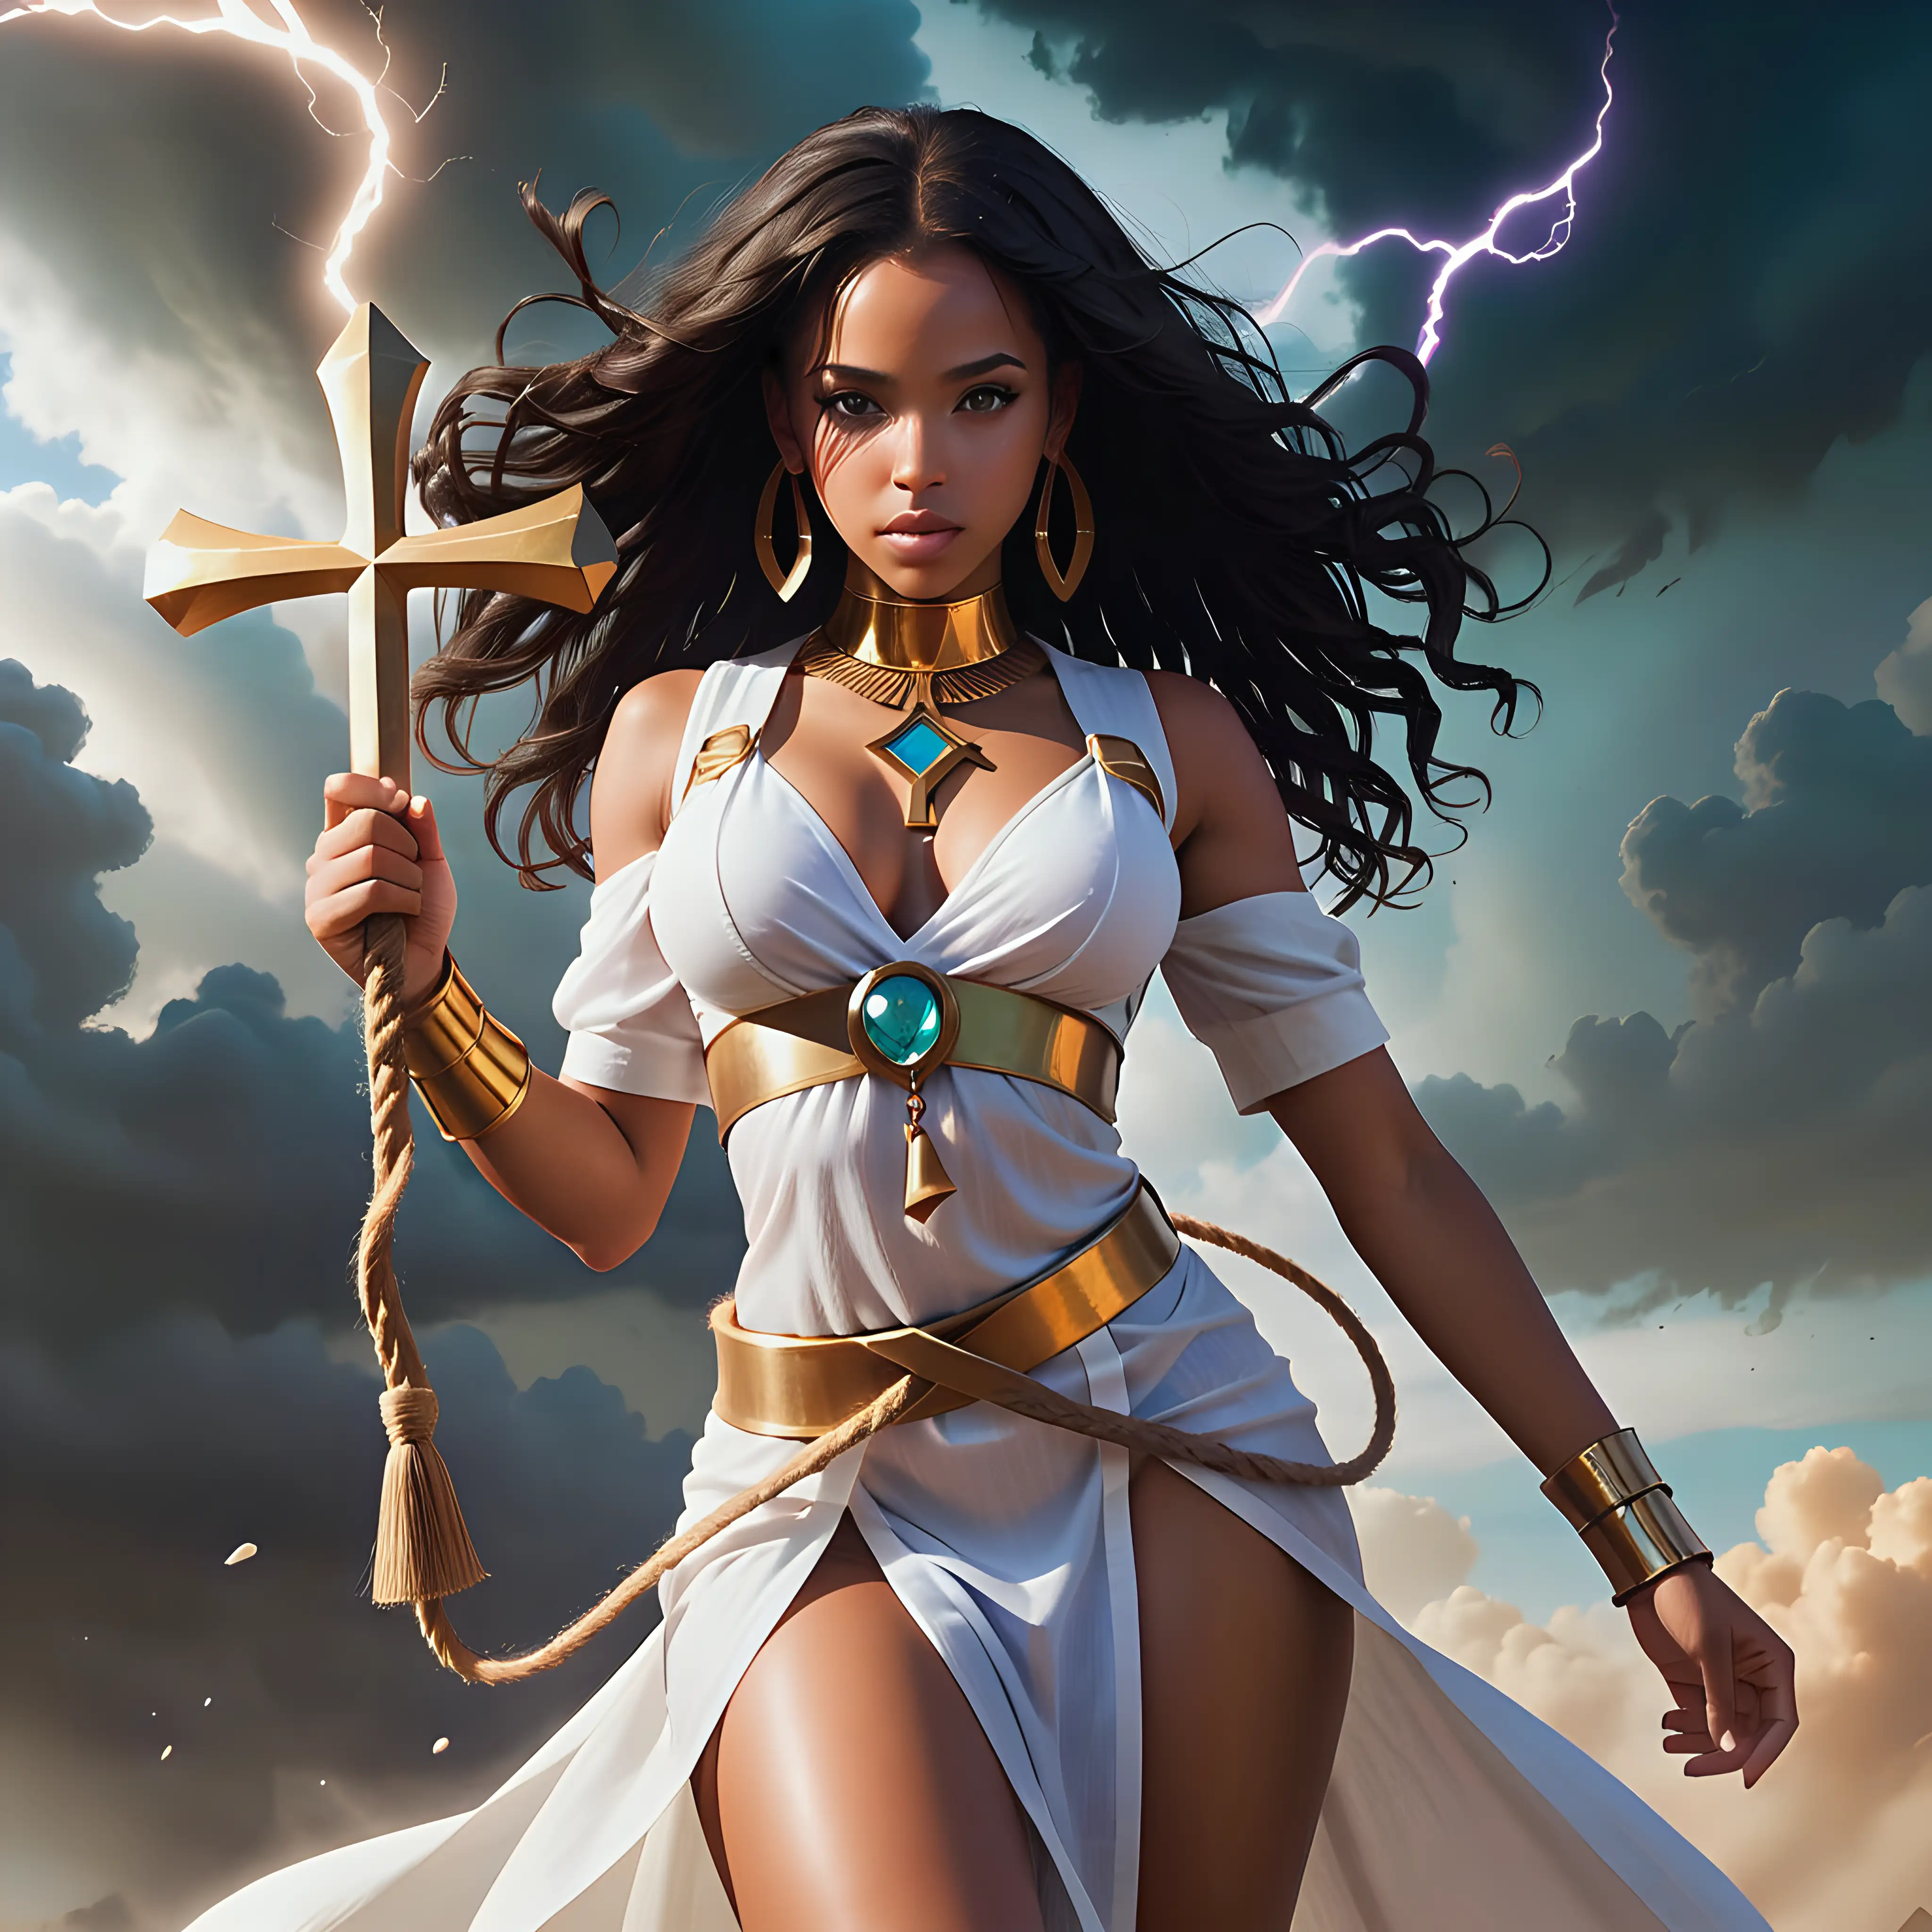 The Ankh granted Quinn, Aaliyah's best friend, the power to  harness the power wind, engulfed in a tornado wielding its force to battle should be fully clothed in Egyptian tunic


